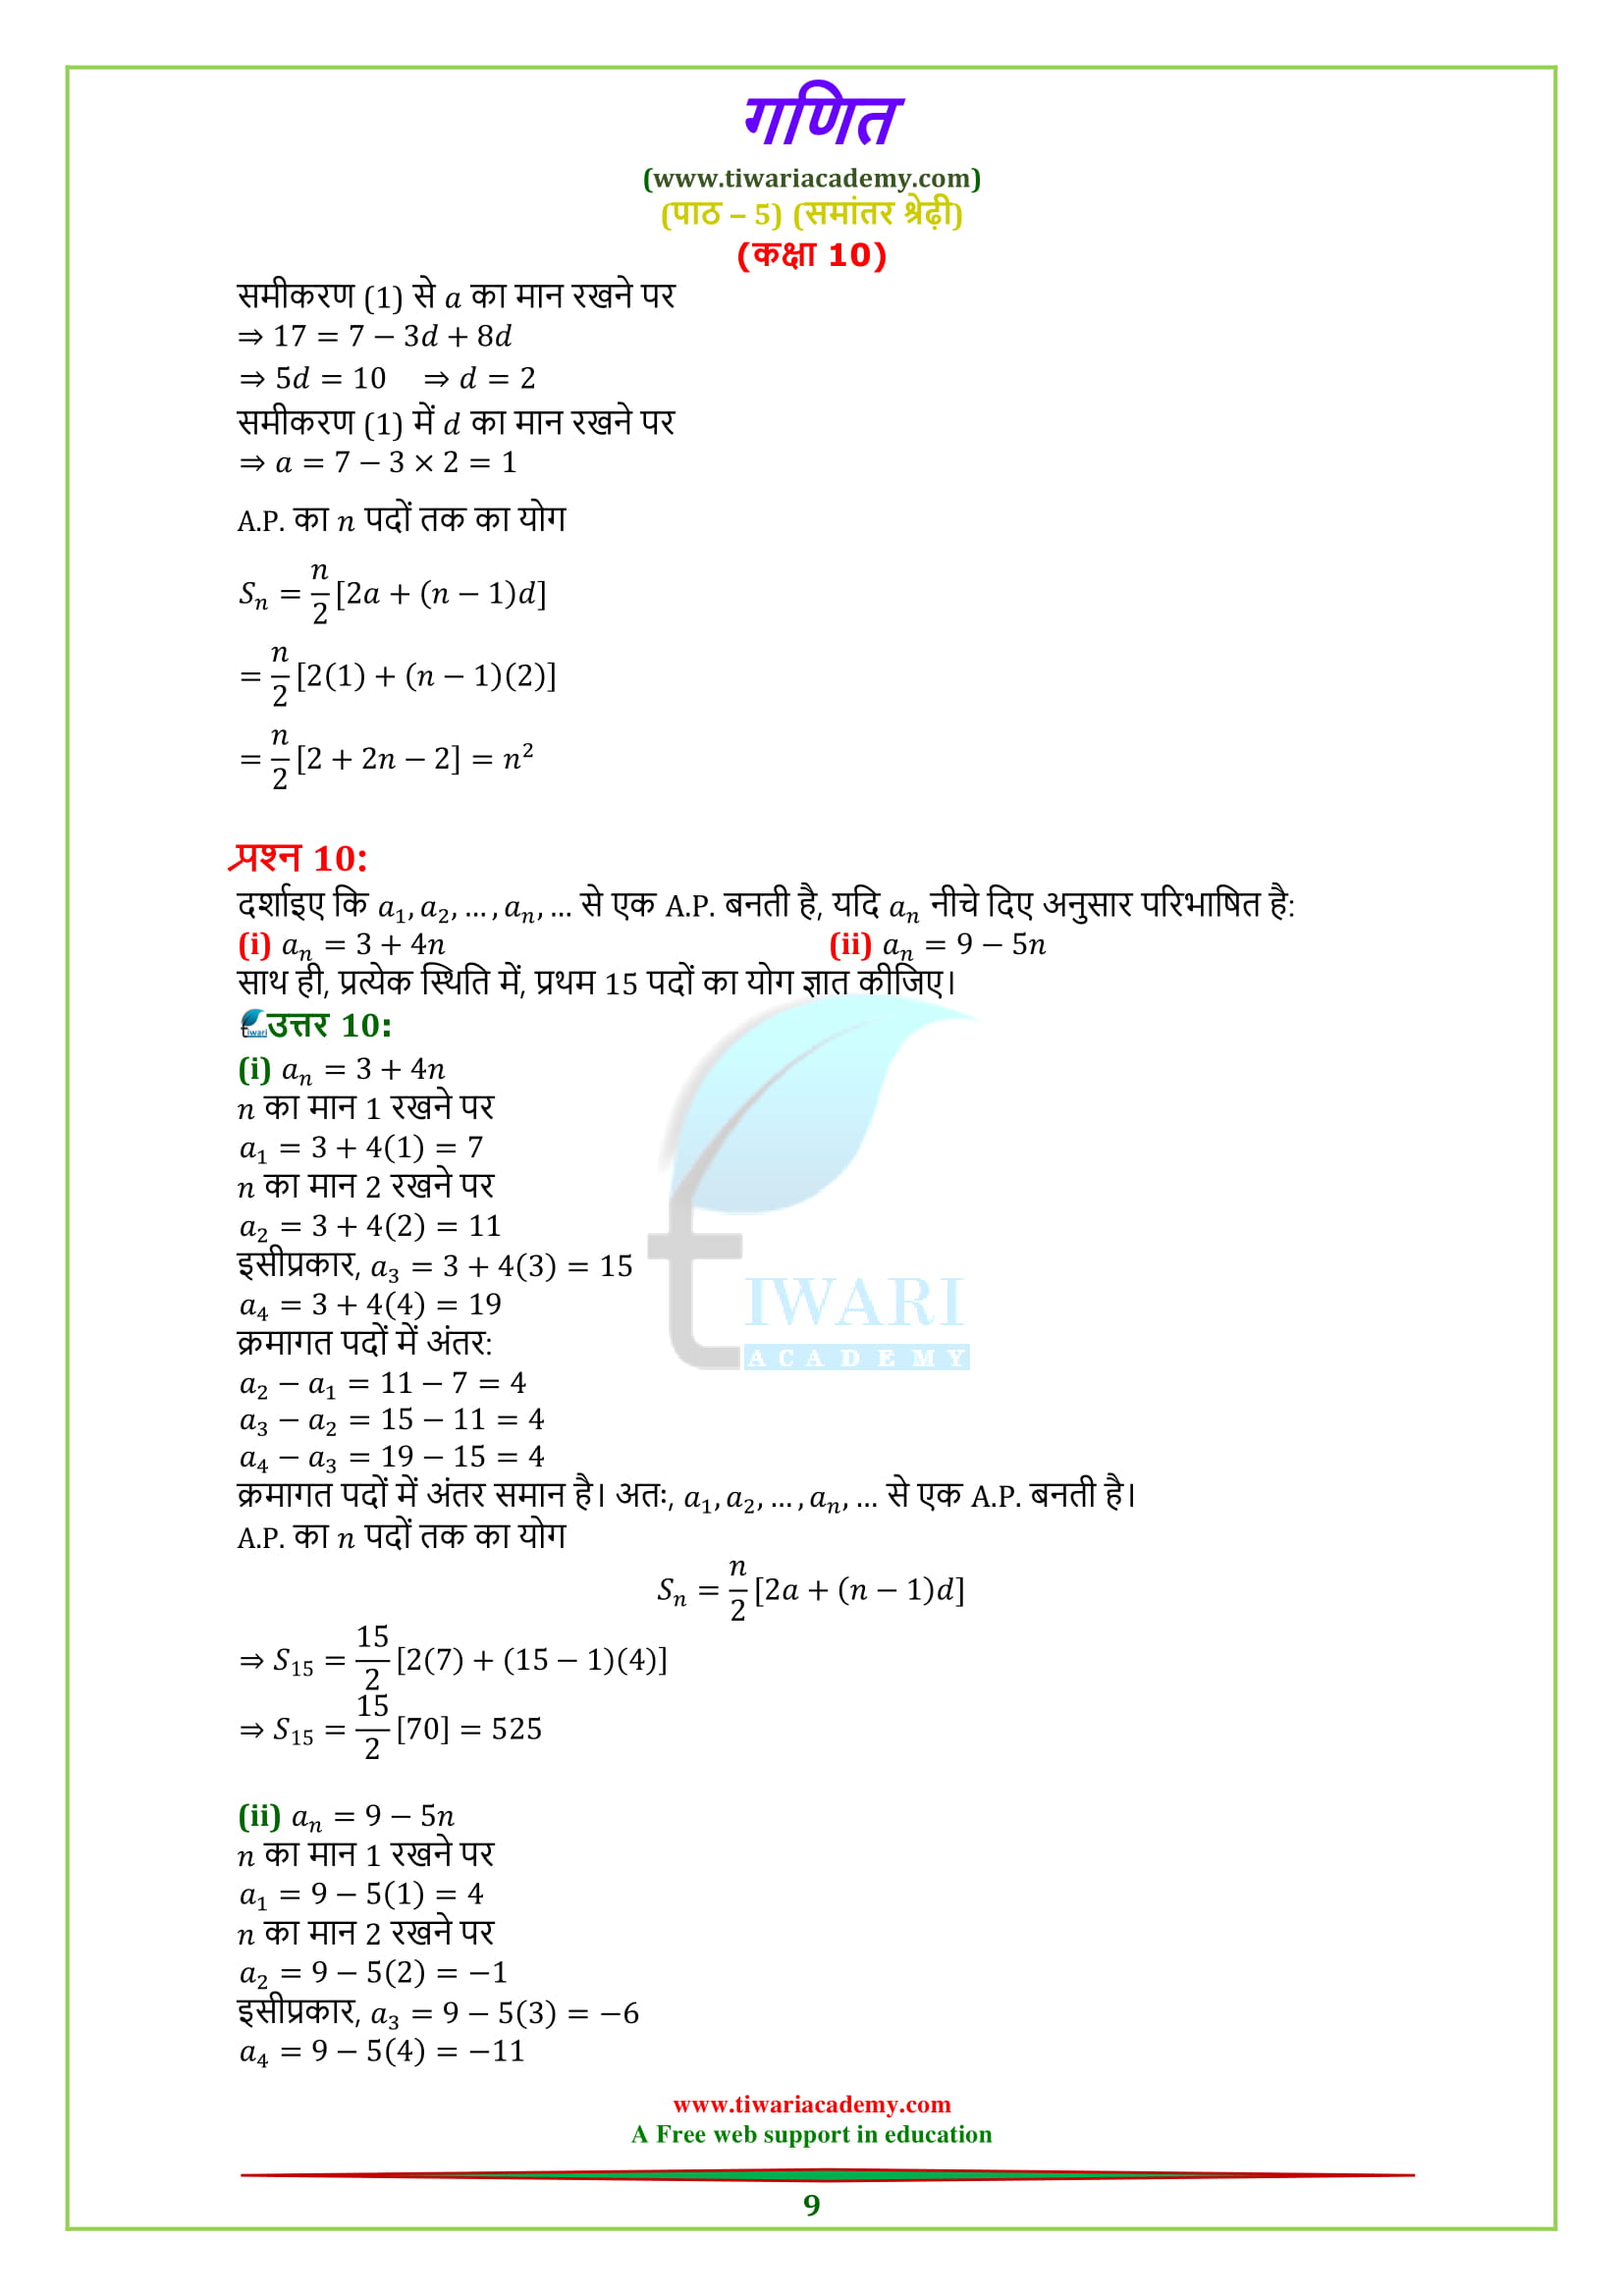 Class 10 Maths Chapter 5 Exercise 5.3 Solutions Questions 10 & 11